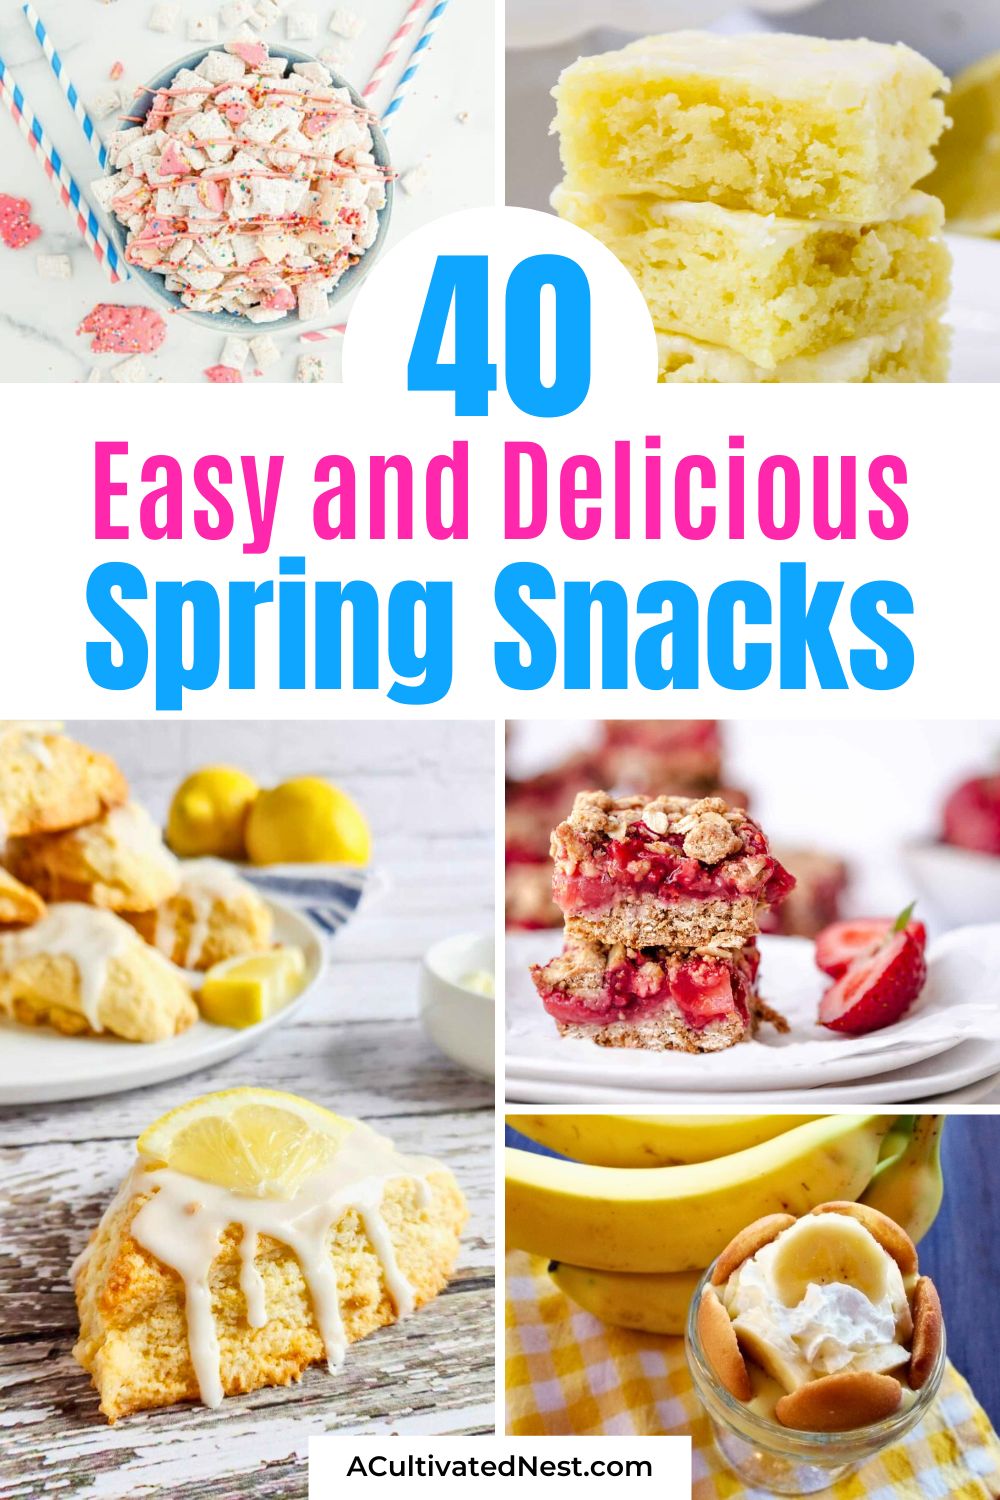 40 Easy Spring Snacks to Make- Get ready to dip, drizzle, and delight with mouthwatering snack ideas for spring! Whether you're looking for quick fixes for after-school hunger or elegant appetizers for your spring soiree, we've got you covered! | #SpringRecipes #SnackTime #recipeIdeas #spring #ACultivatedNest